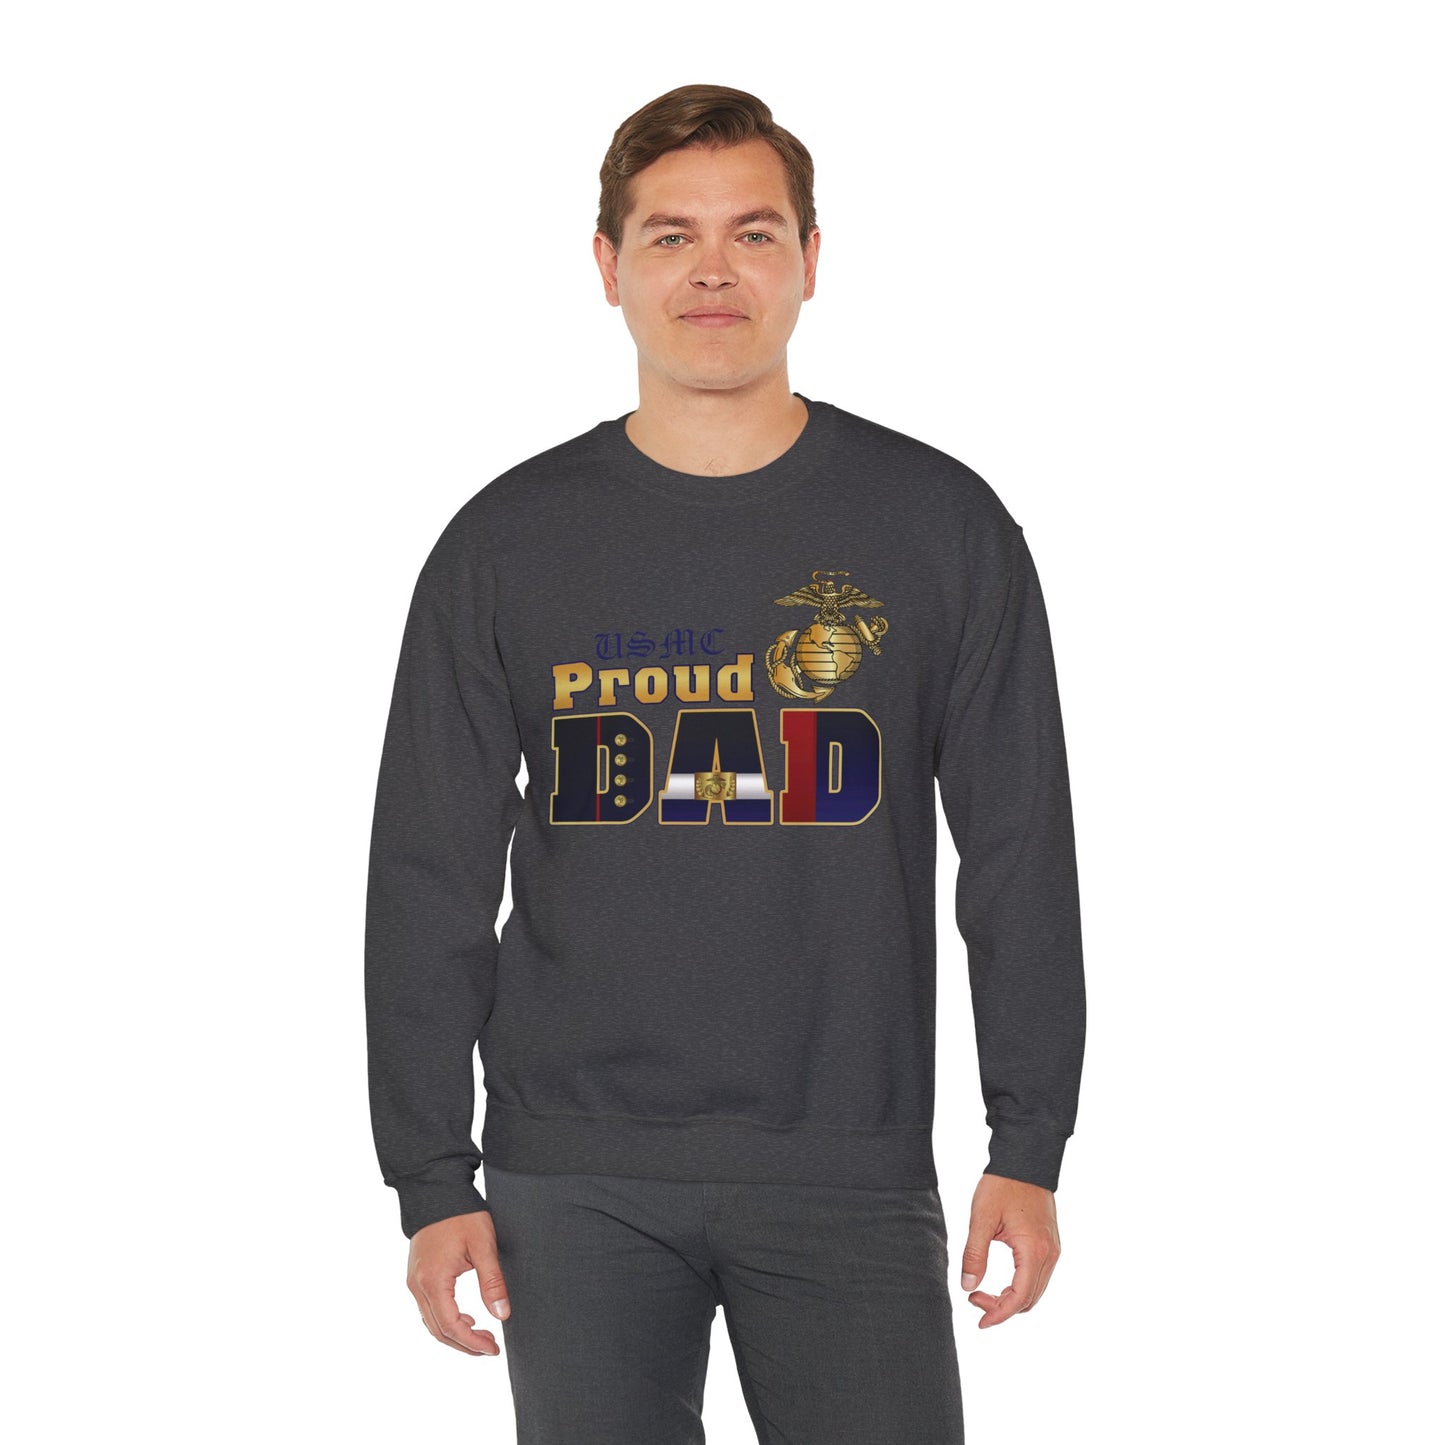 Sweatshirt: Dress Blue Proud Dad (Your Choice of Colors)